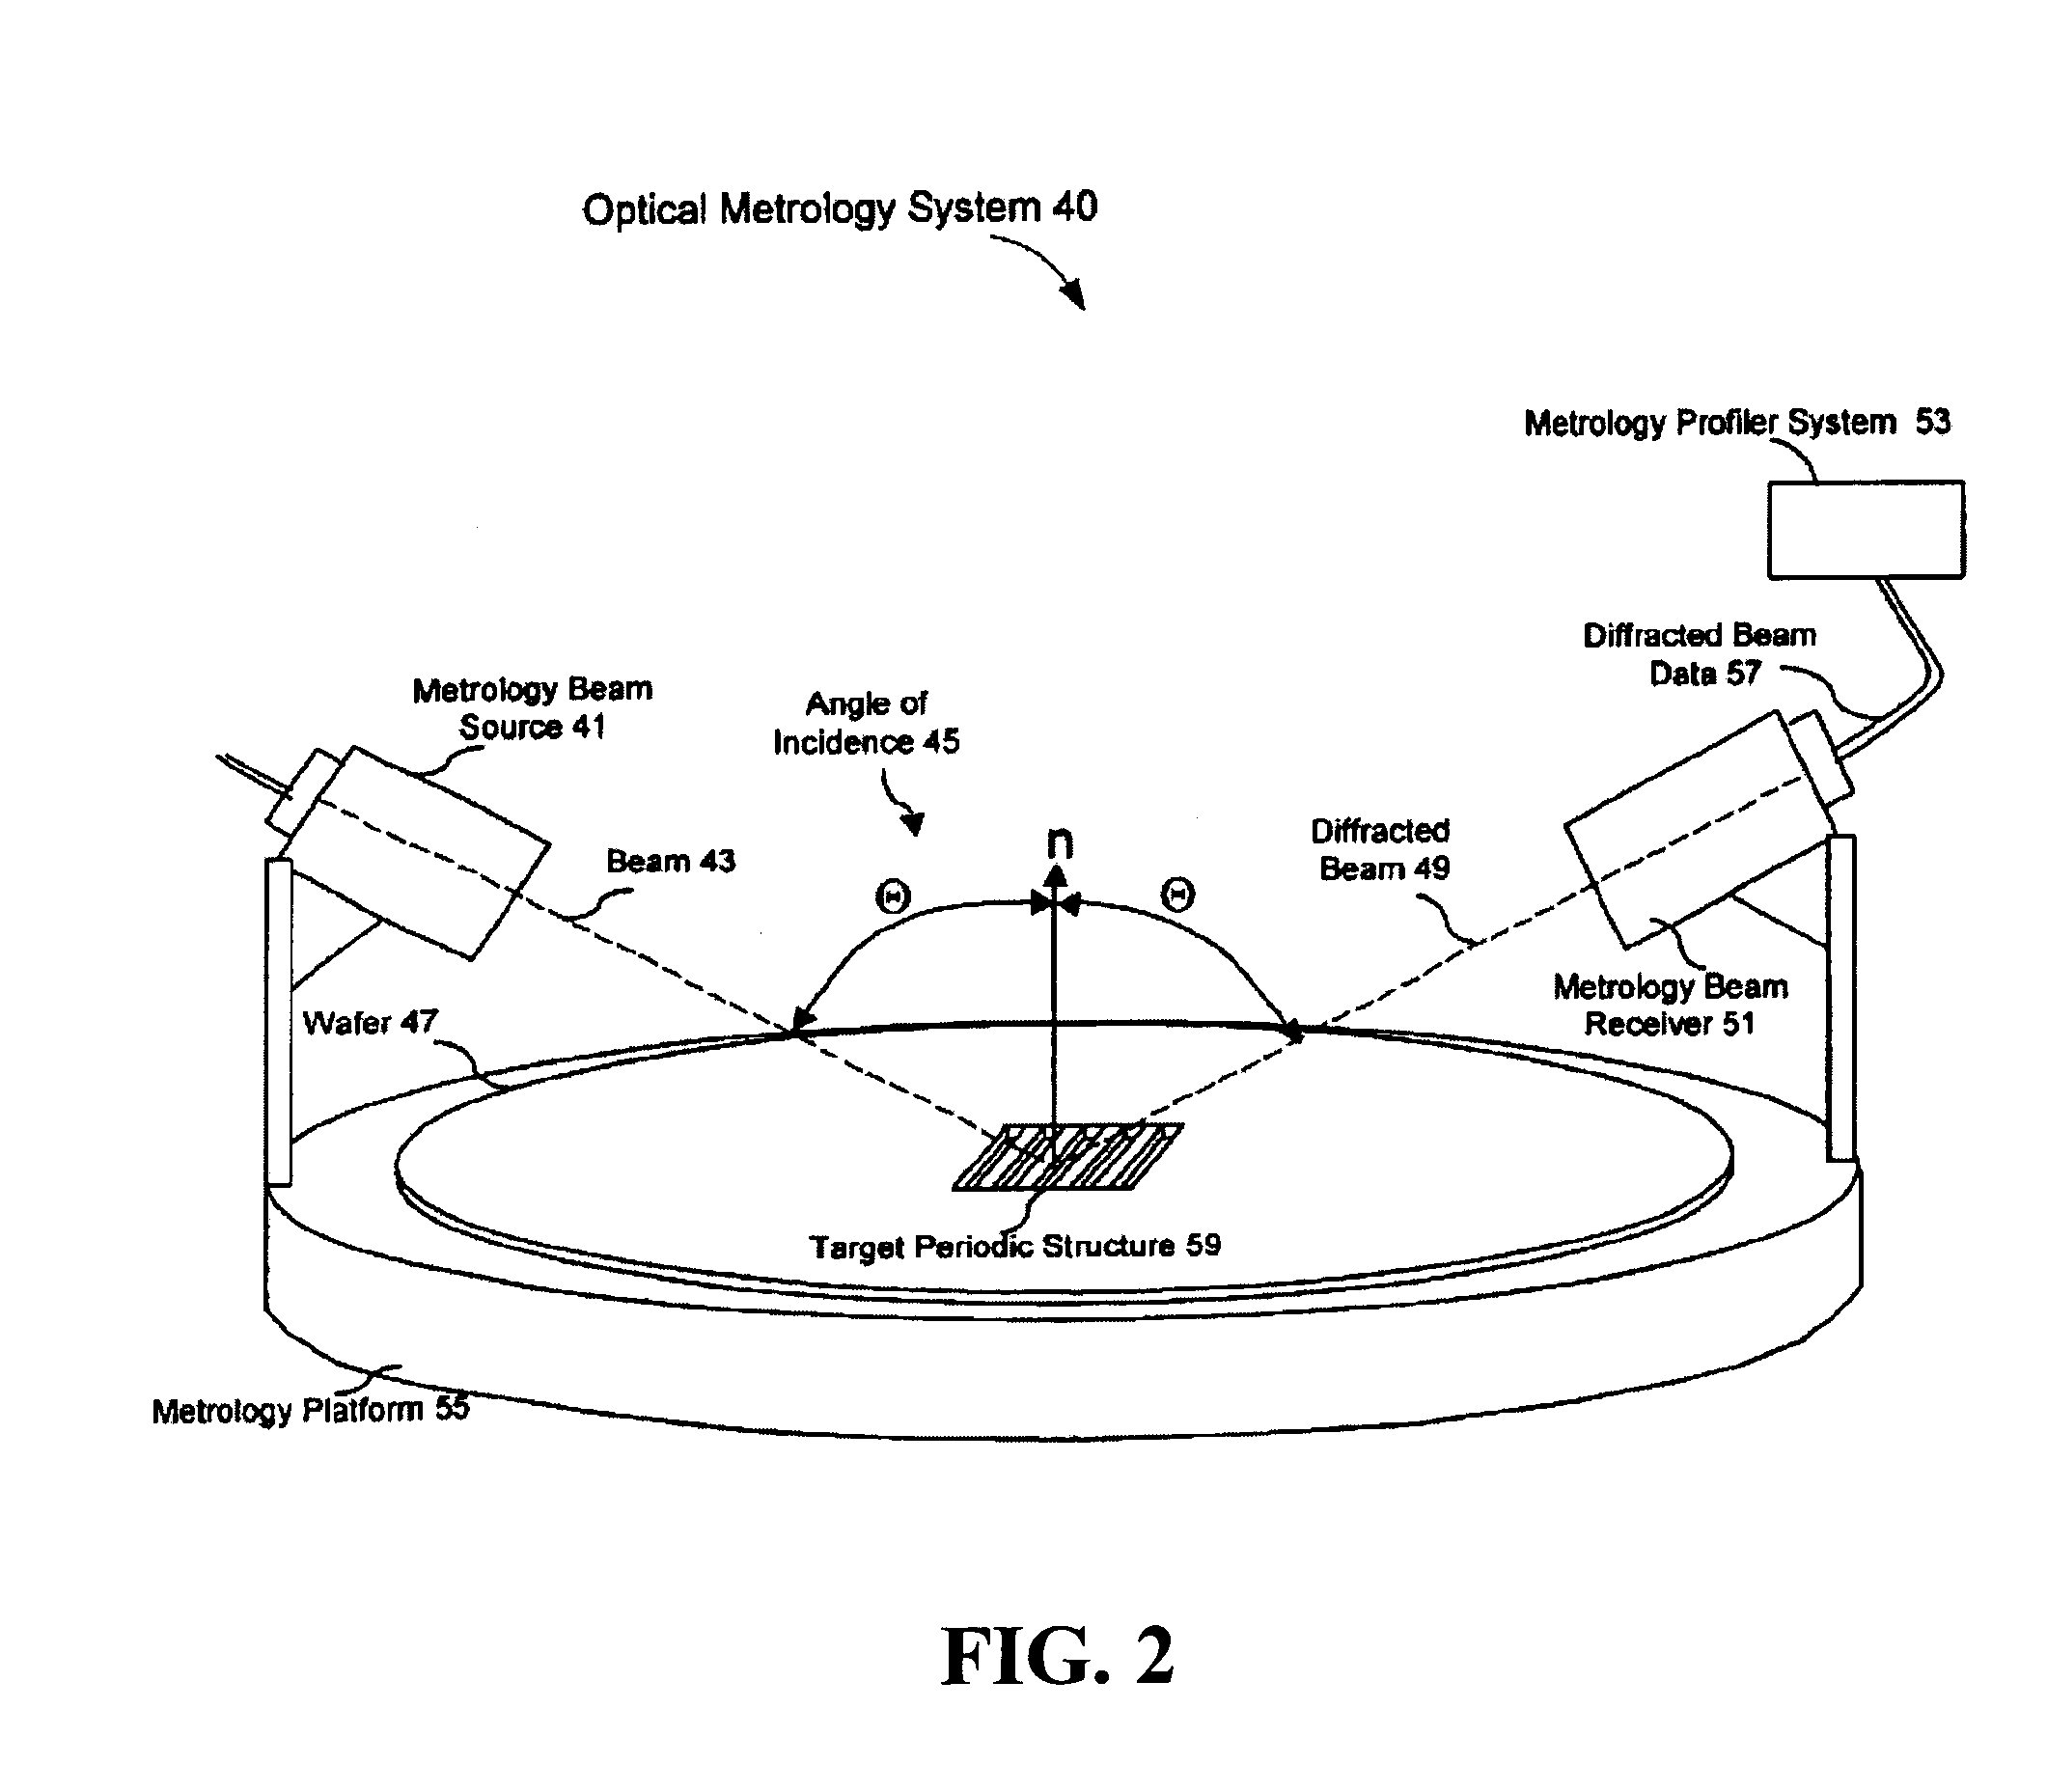 Method of correcting systematic error in a metrology system